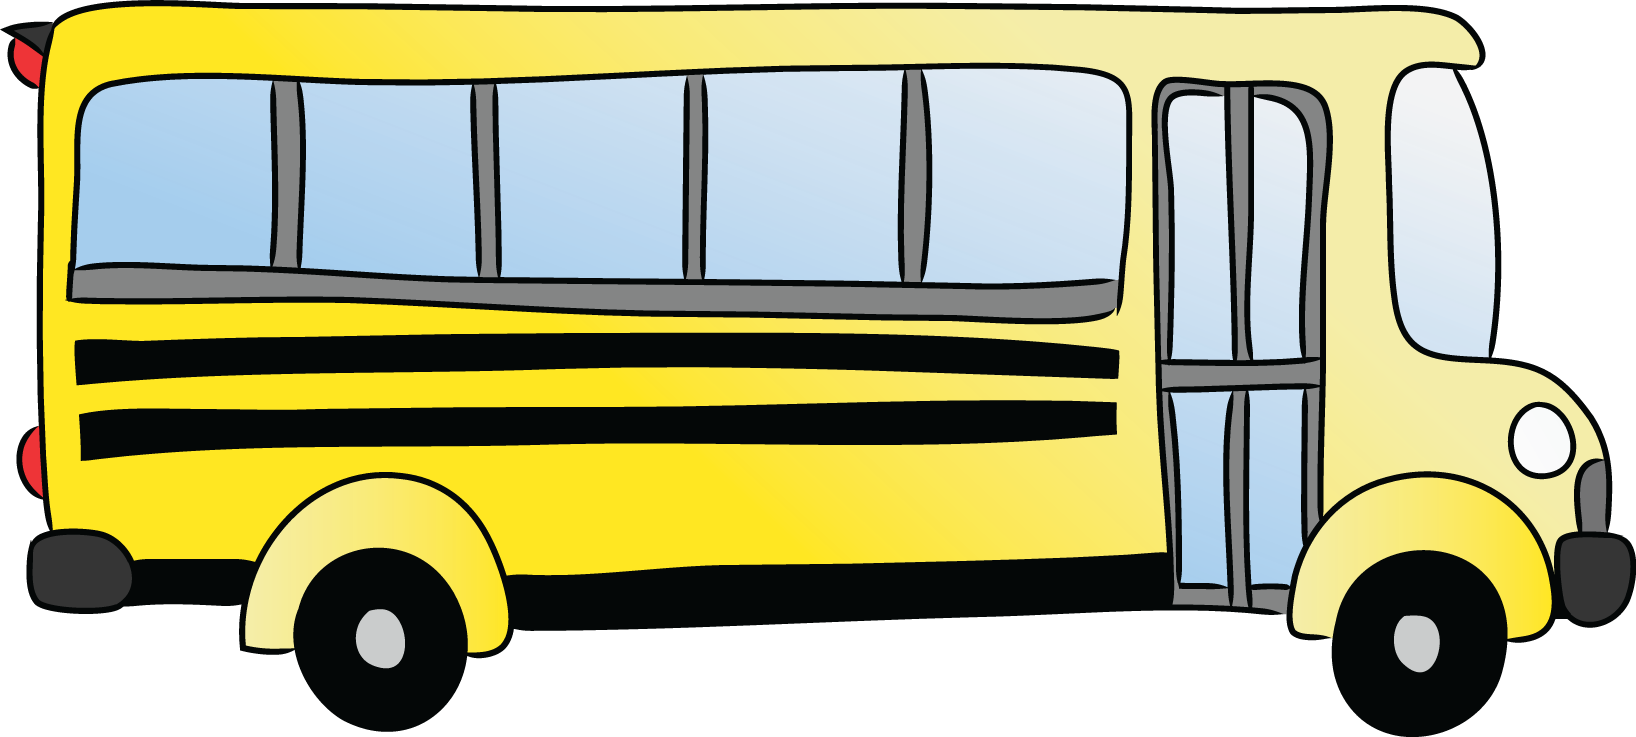 clipart picture of a bus - photo #17